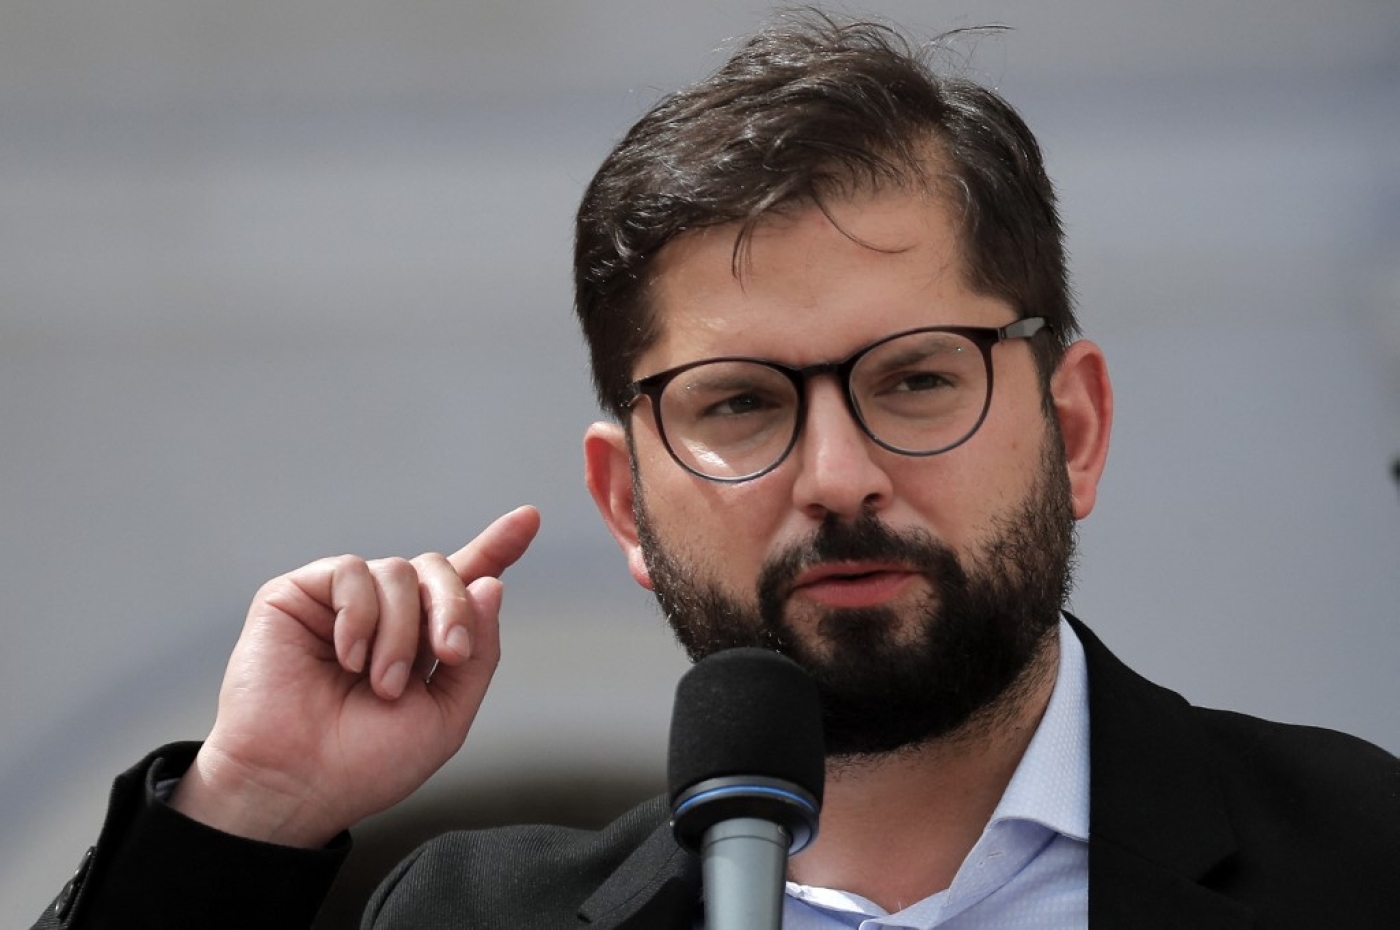 Boric, 35, who rose to fame as a student leader, secured 56 percent of the votes, 12 percent more than Jose Antonio Kast, a right-wing, pro-Israel politician